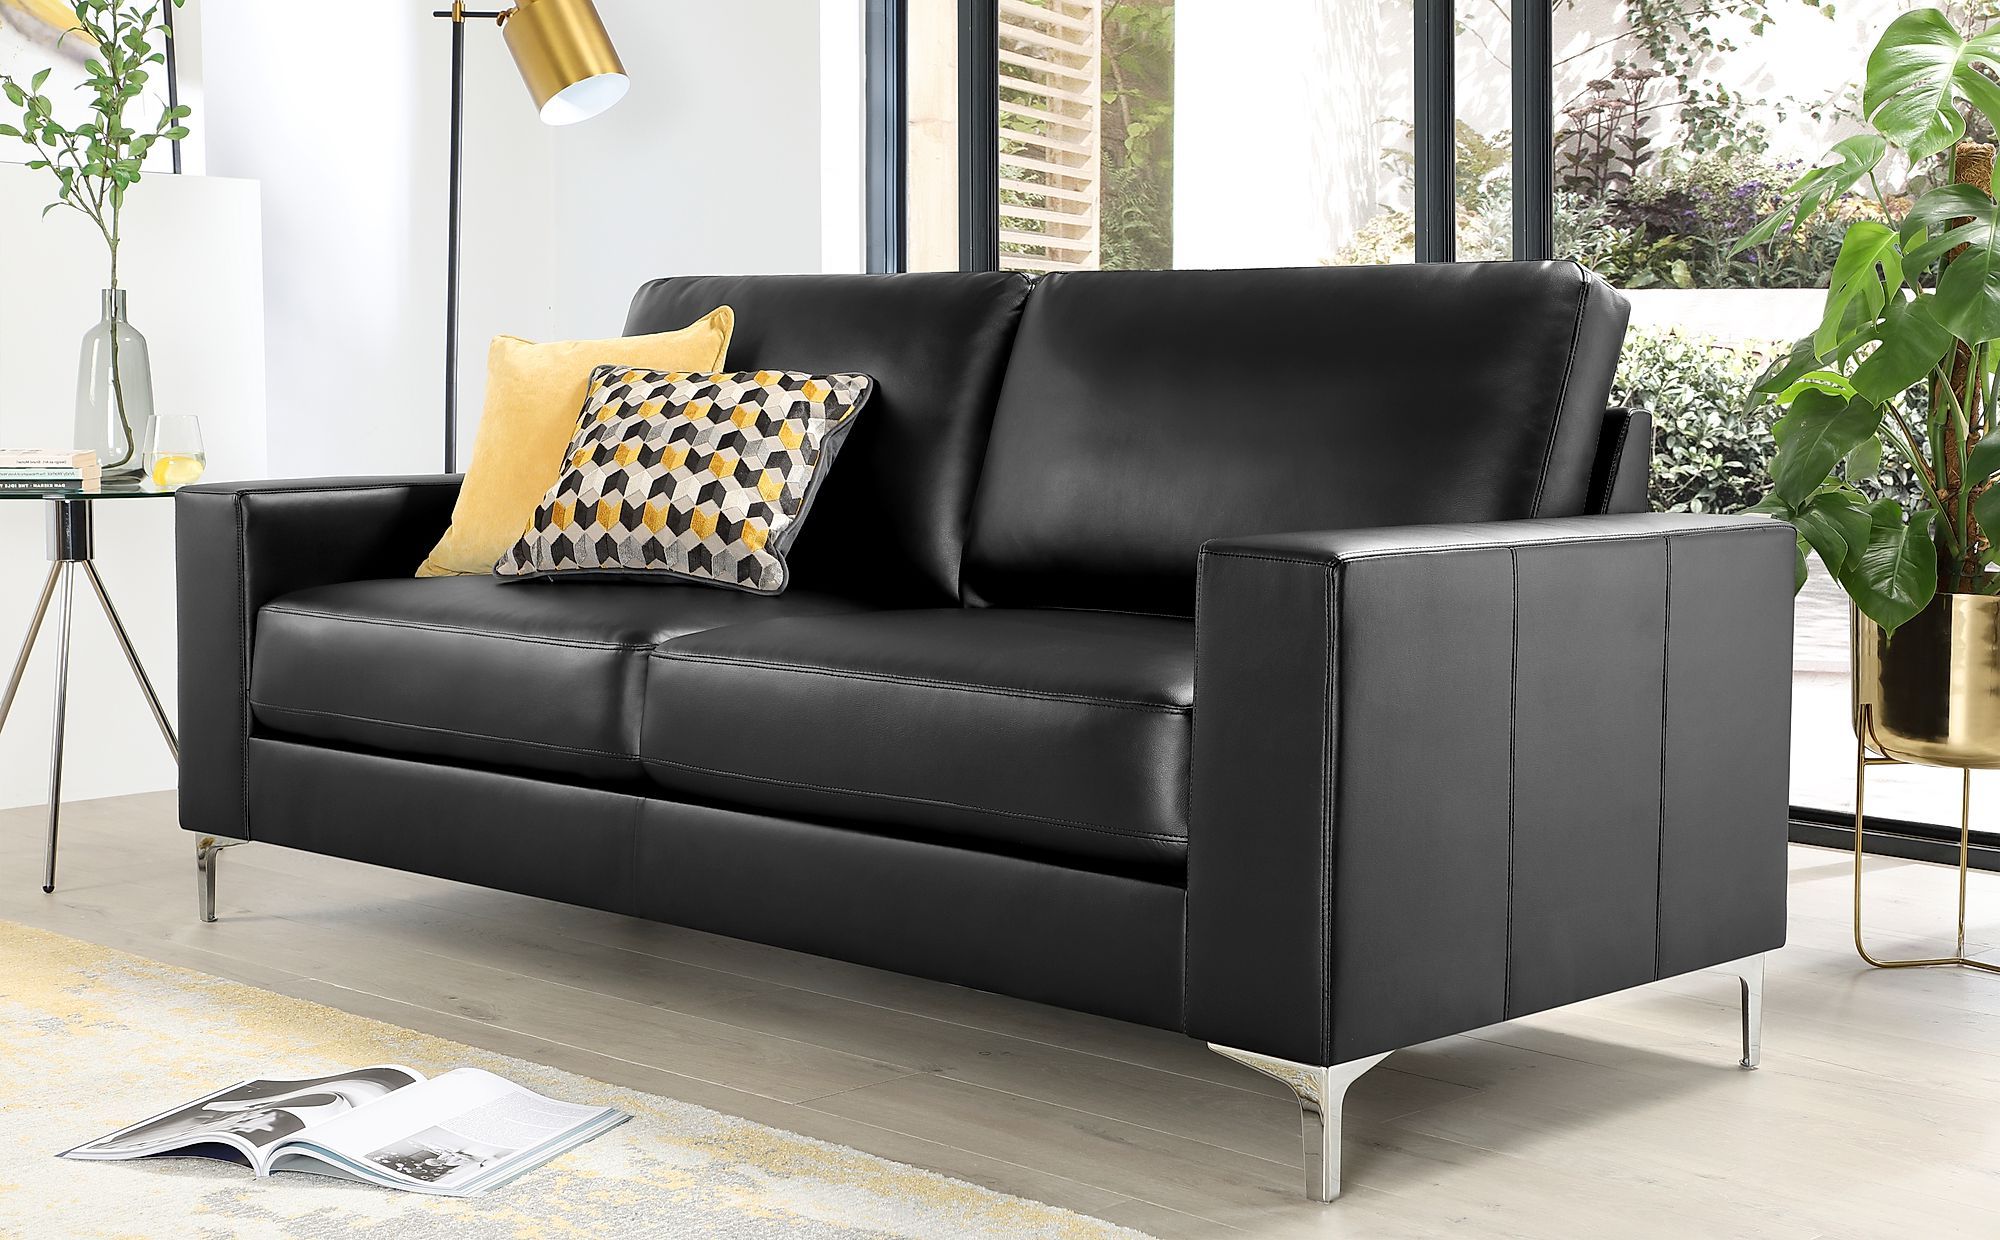 Furniture Choice Within Right Facing Black Sofas (View 12 of 15)